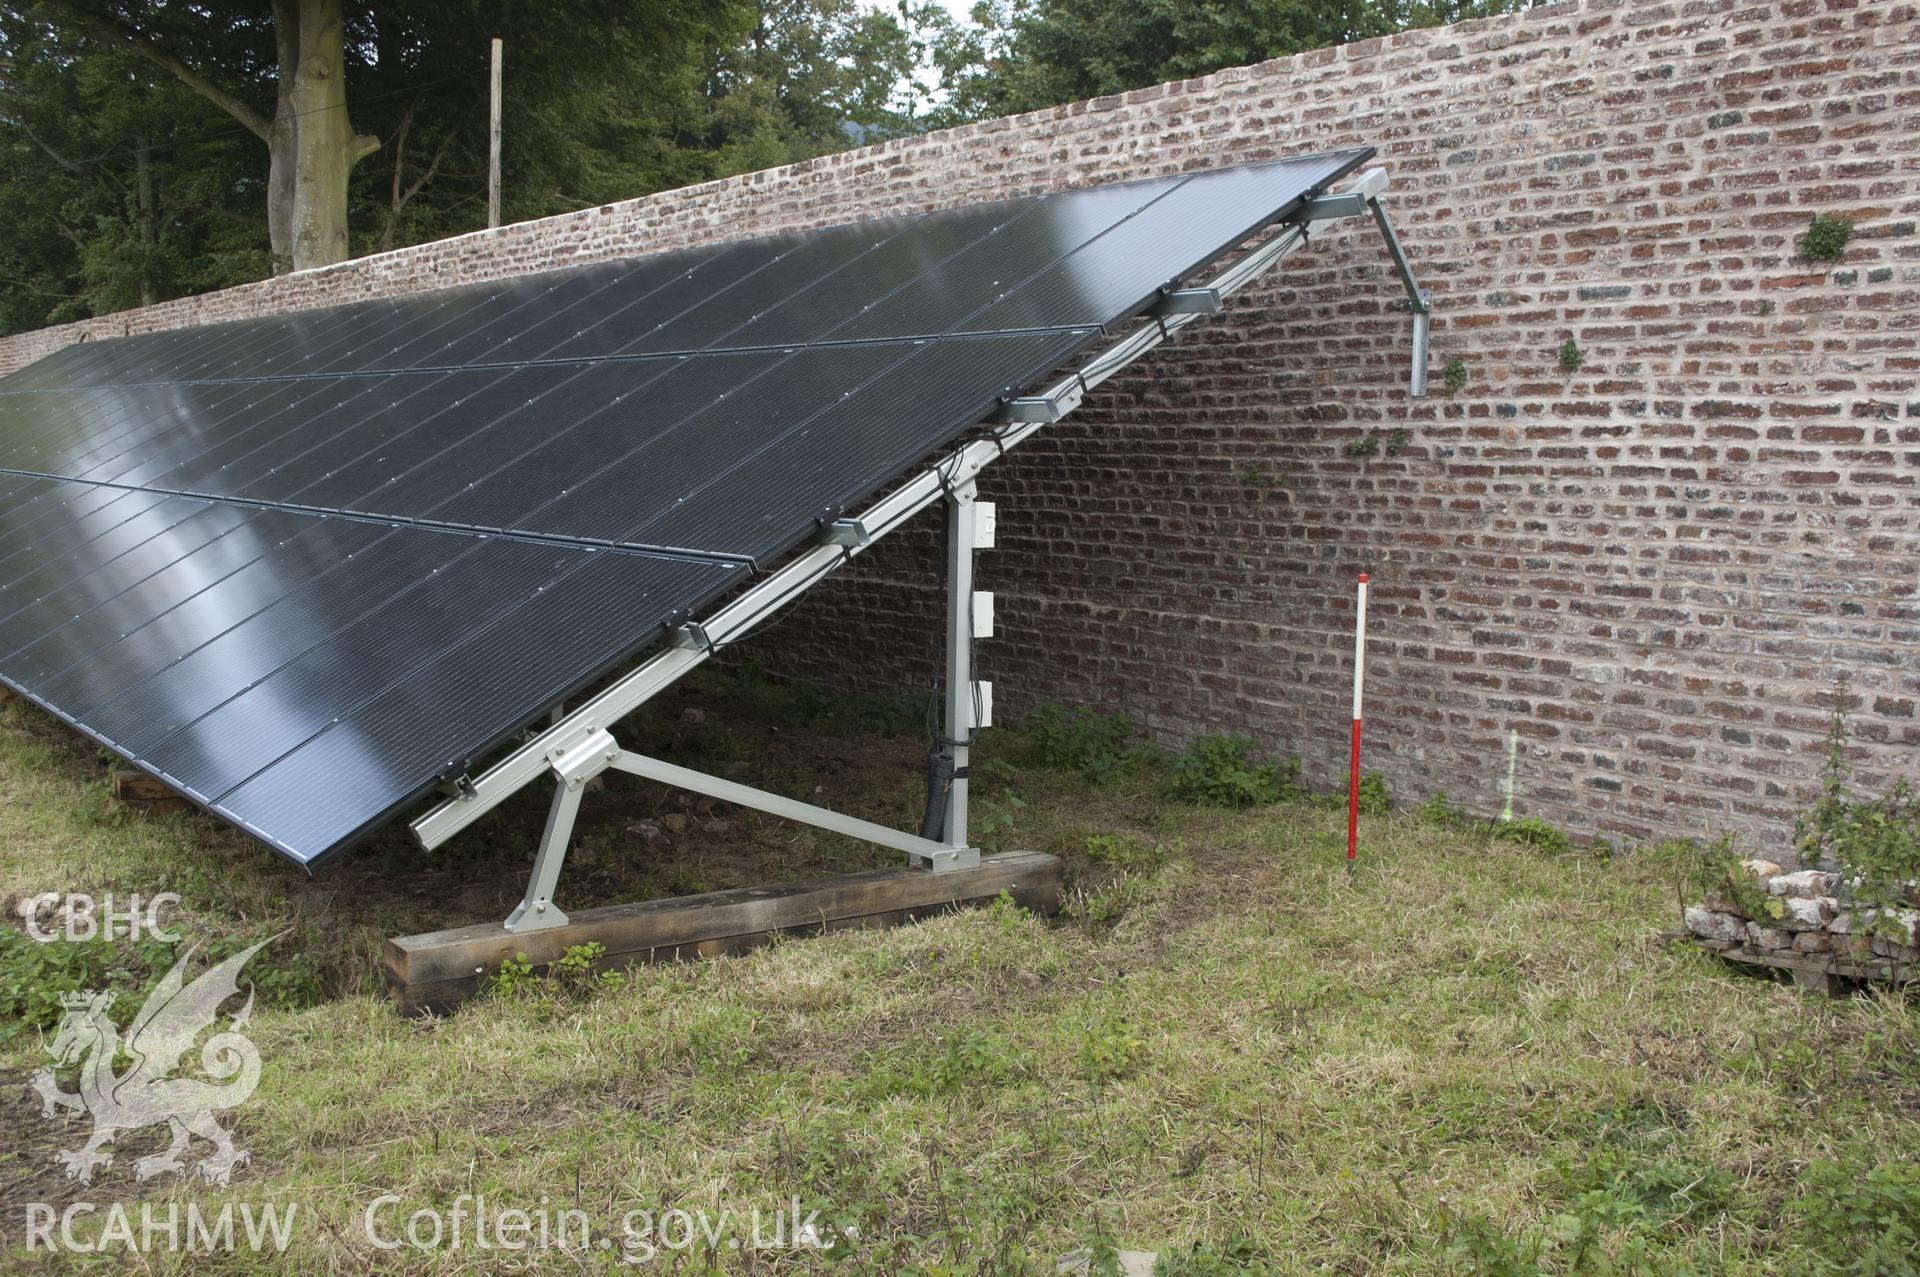 View from west showing solar panel attached to north wall of kitchen garden.